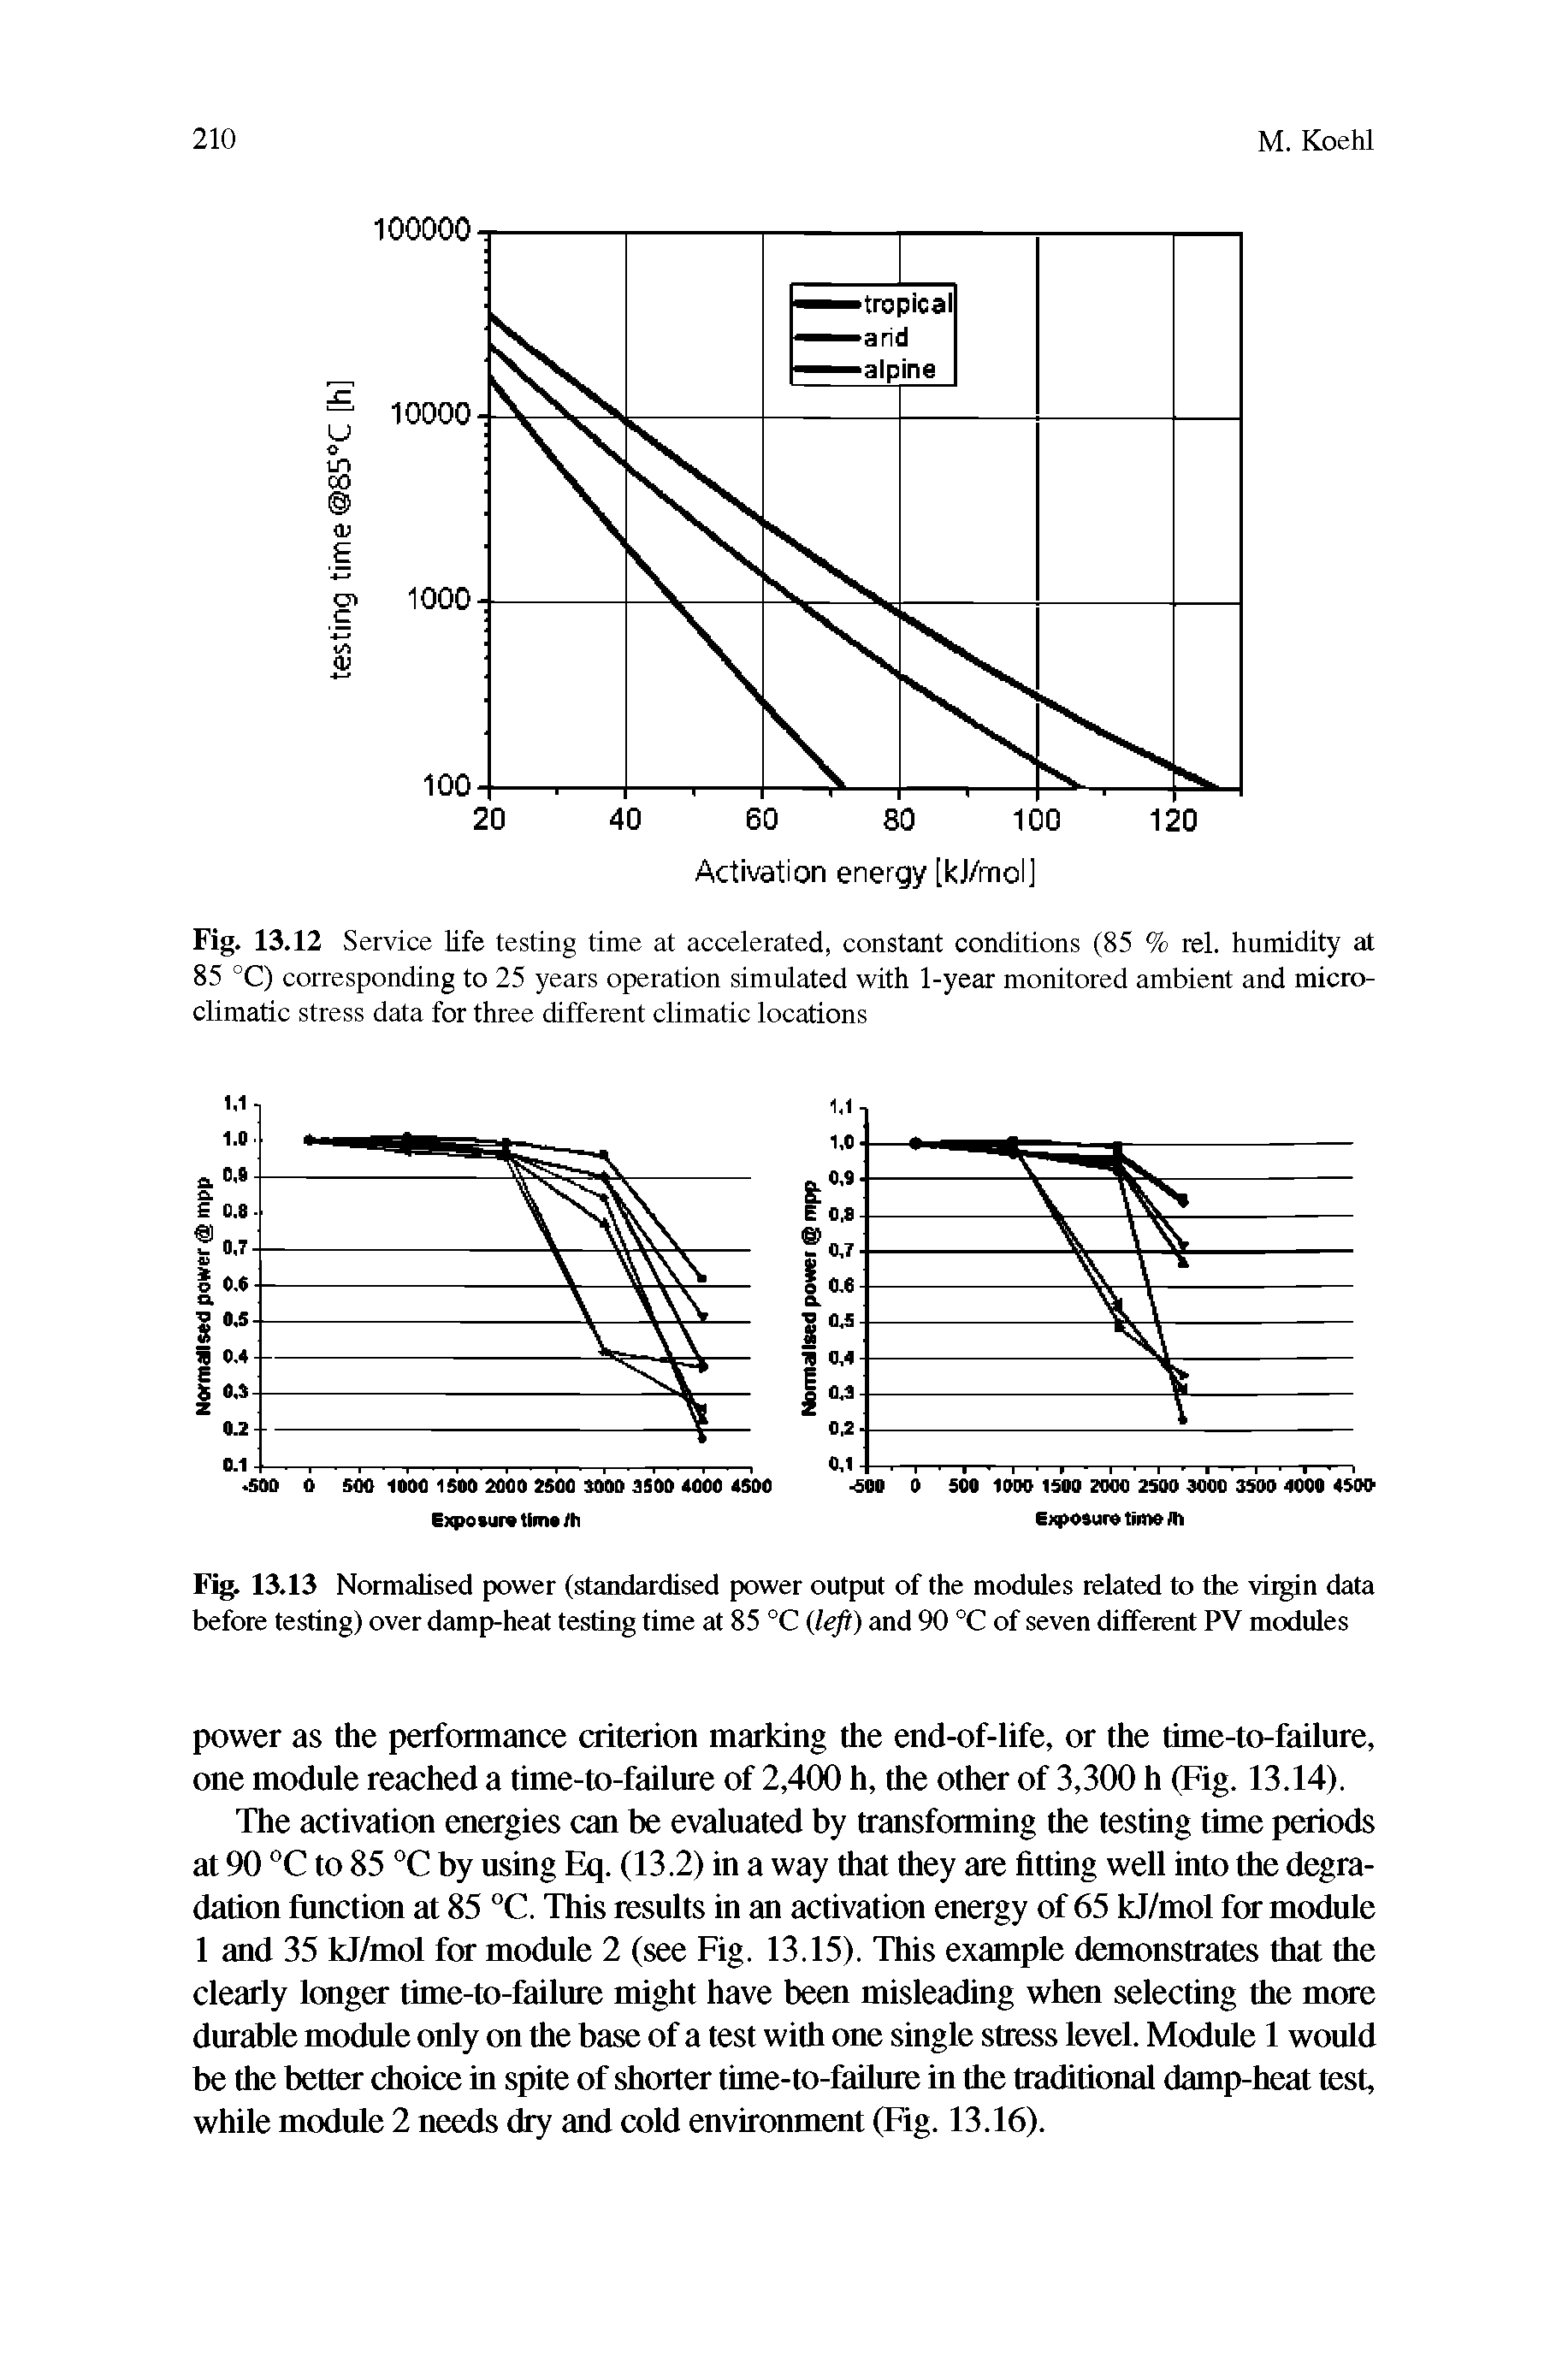 Fig. 13.13 Normahsed power (standardised power output of the modules related to the virgin data before testing) over damp-heat testing time at 85 °C (left) and 90 °C of seven different PV modules...